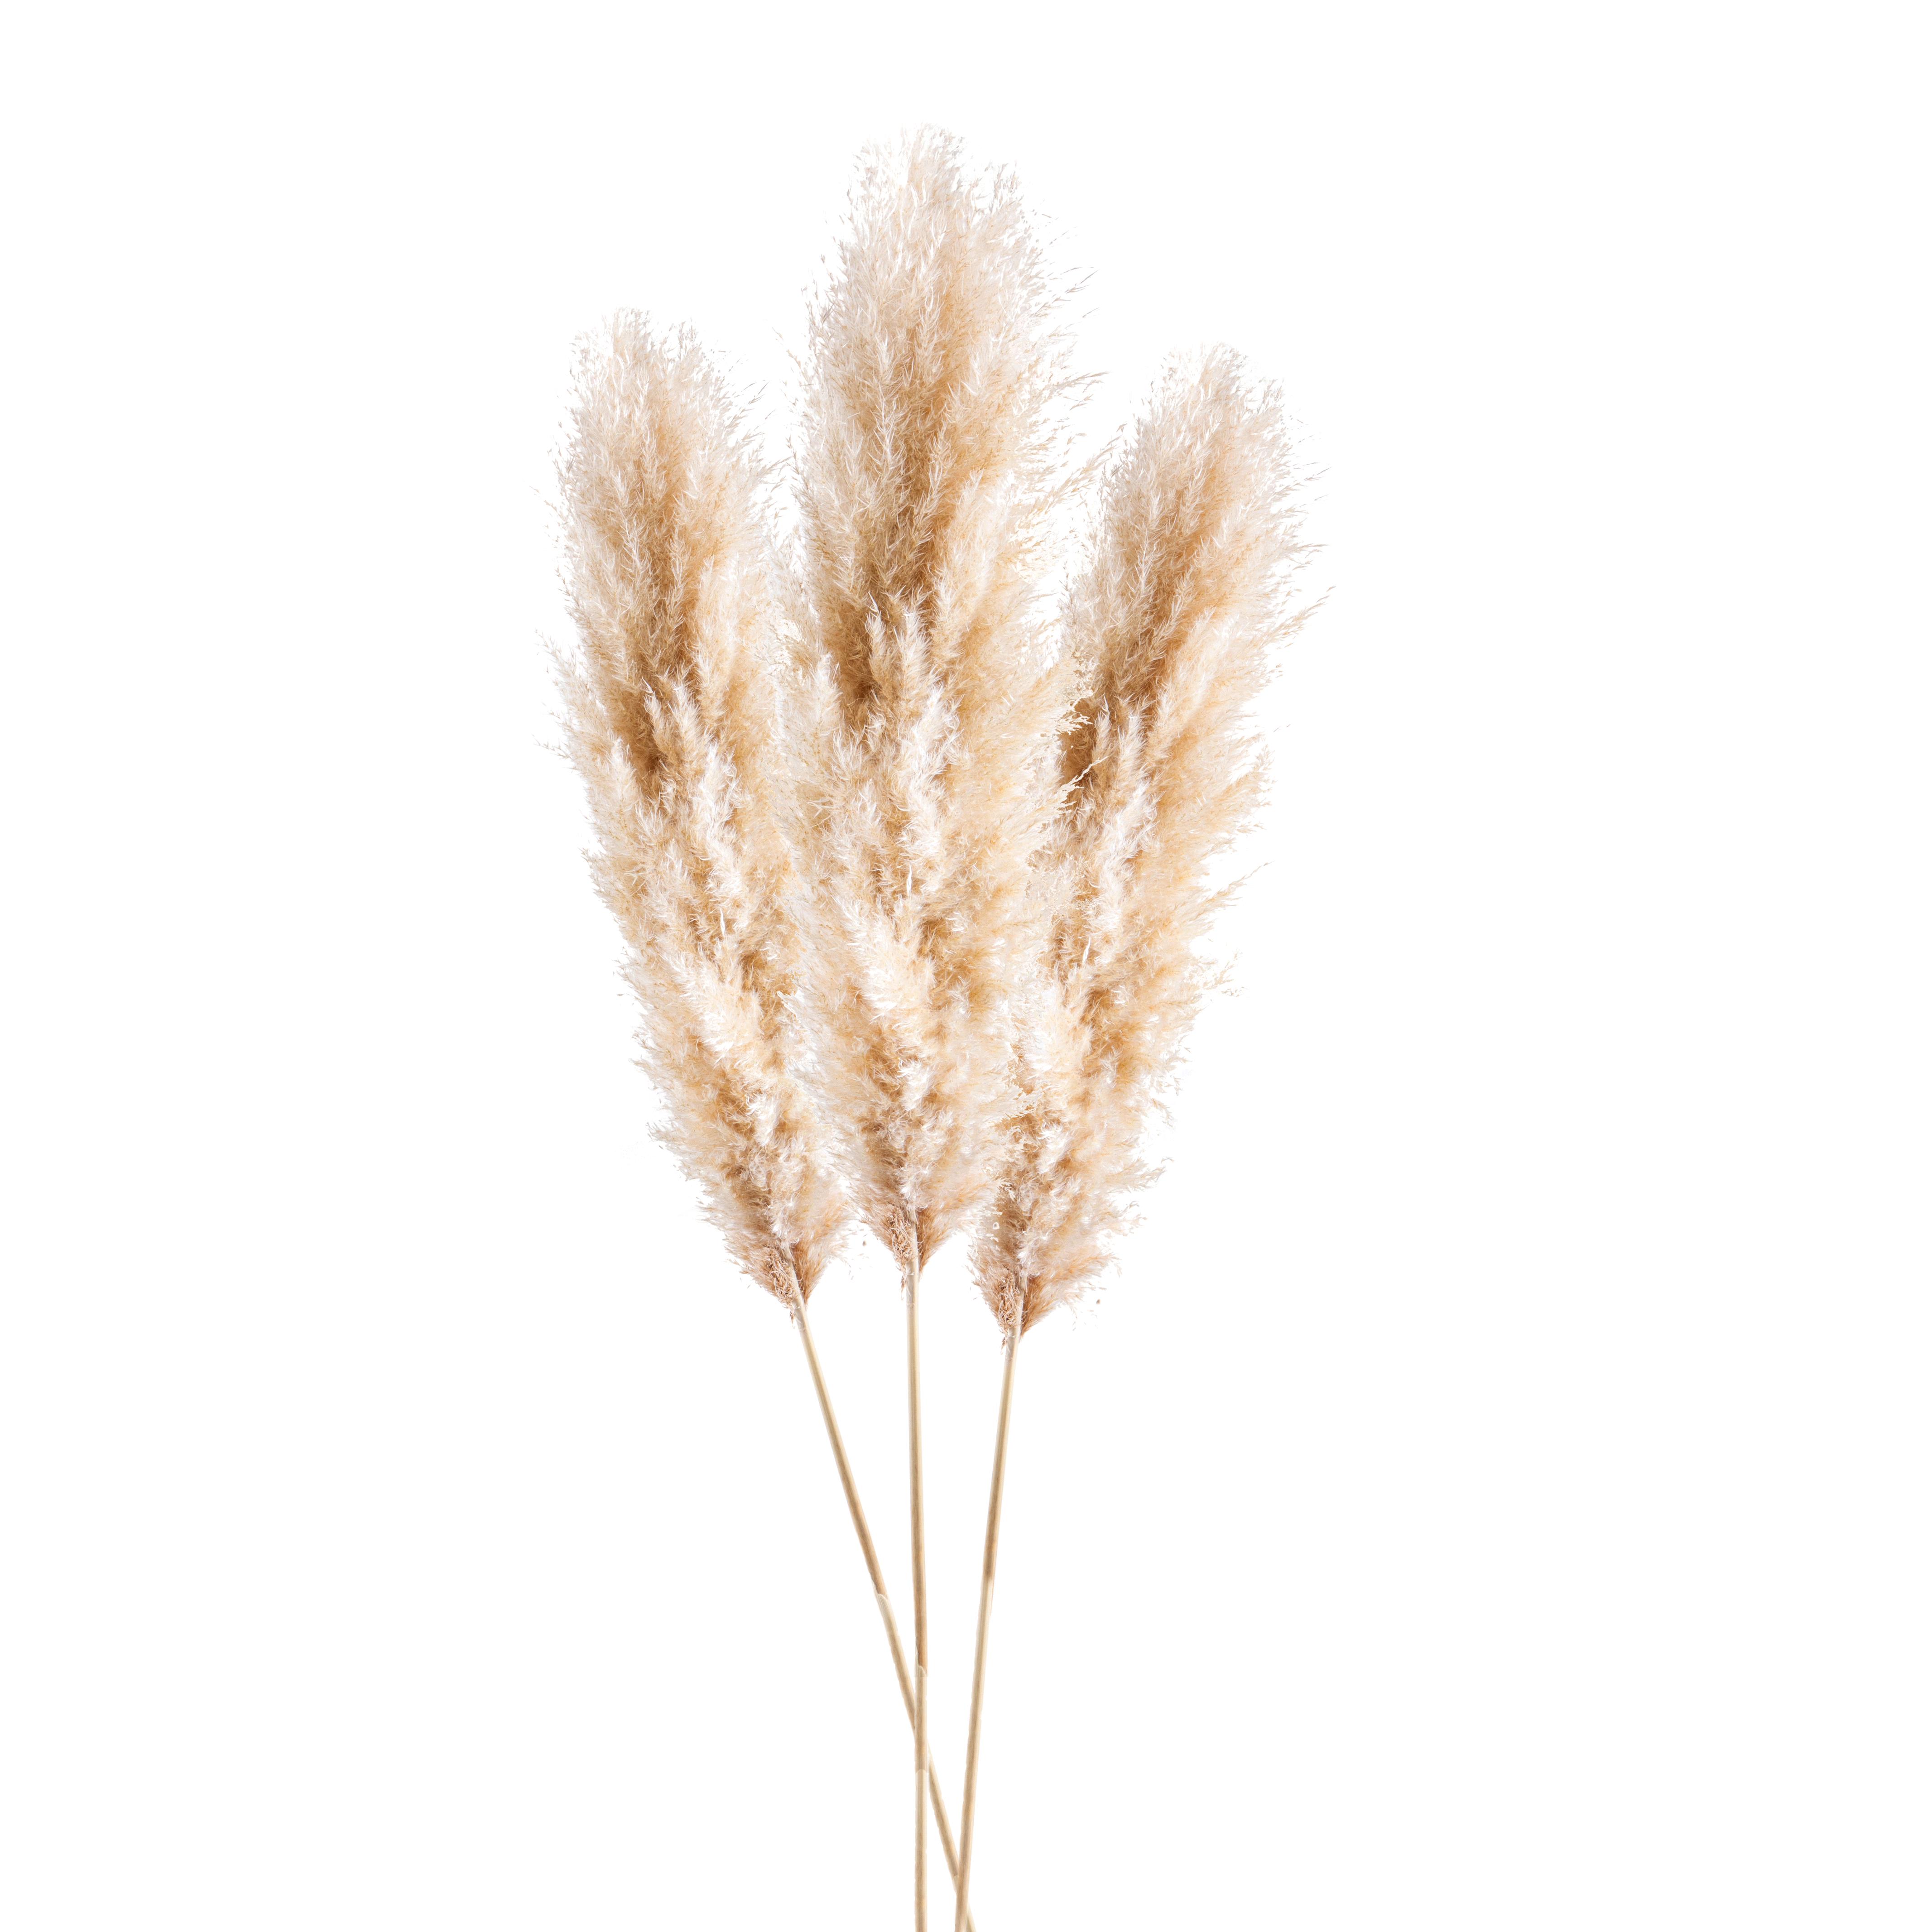 NATURAL PRODUCTS DRIED FLOWERS AND ERBS, FLOWERS, FRUITS AND NATURAL PROTEES, PAMPAS NATURALE 1 PZ 140/150 CM SACCO